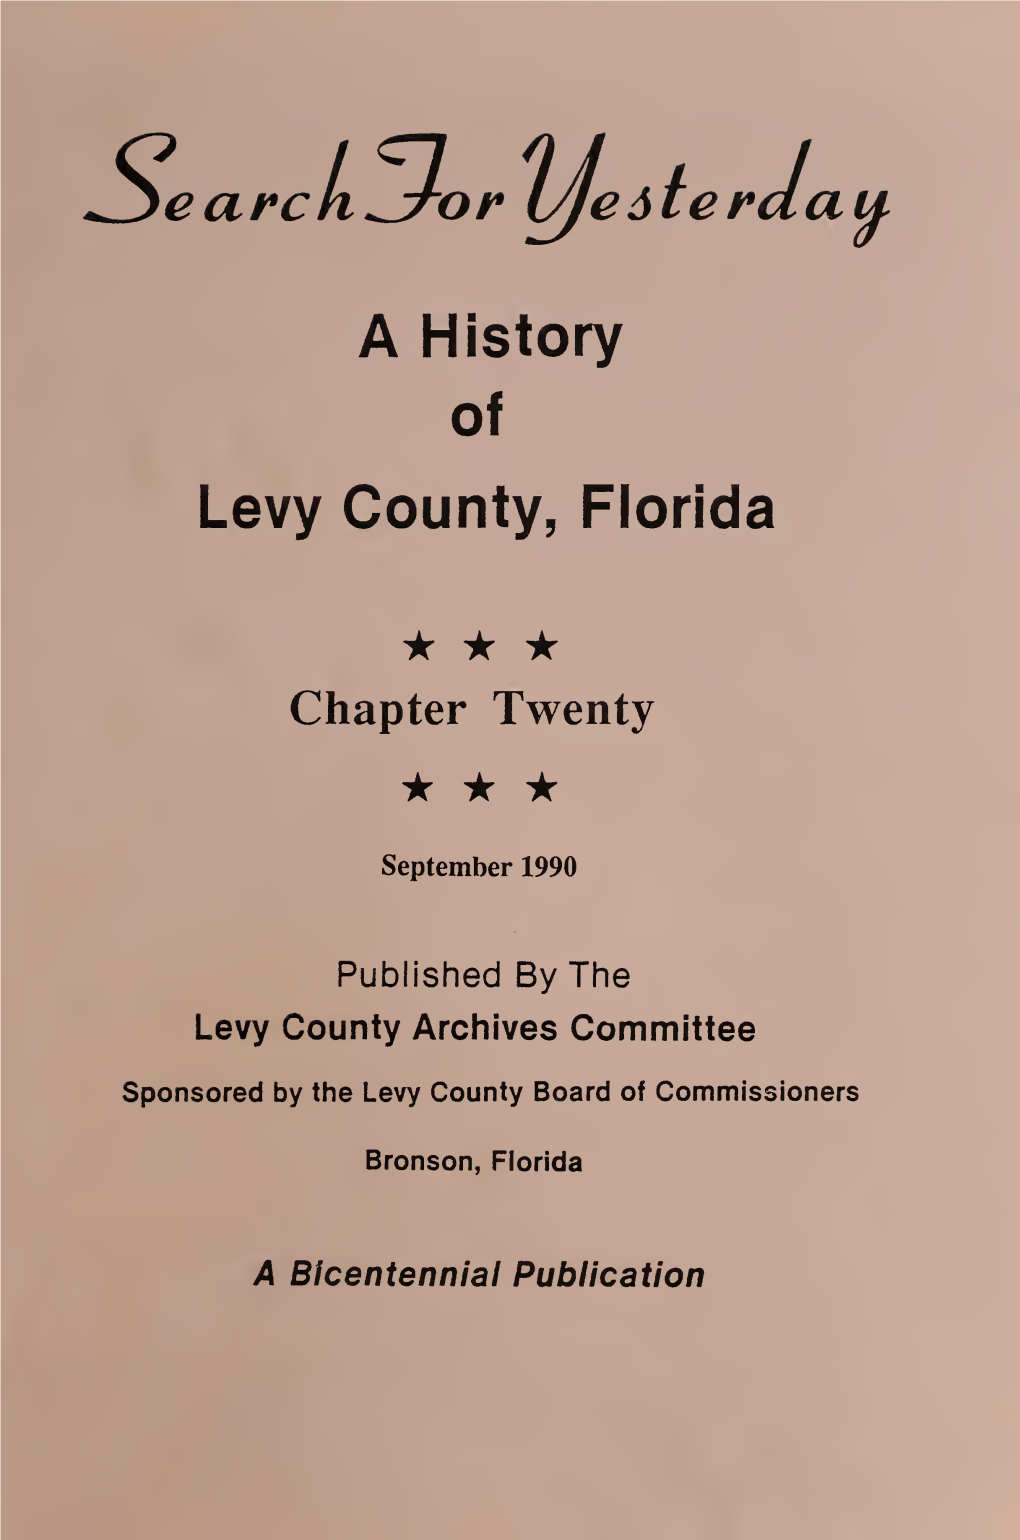 Search for Yesterday: a History of Levy County